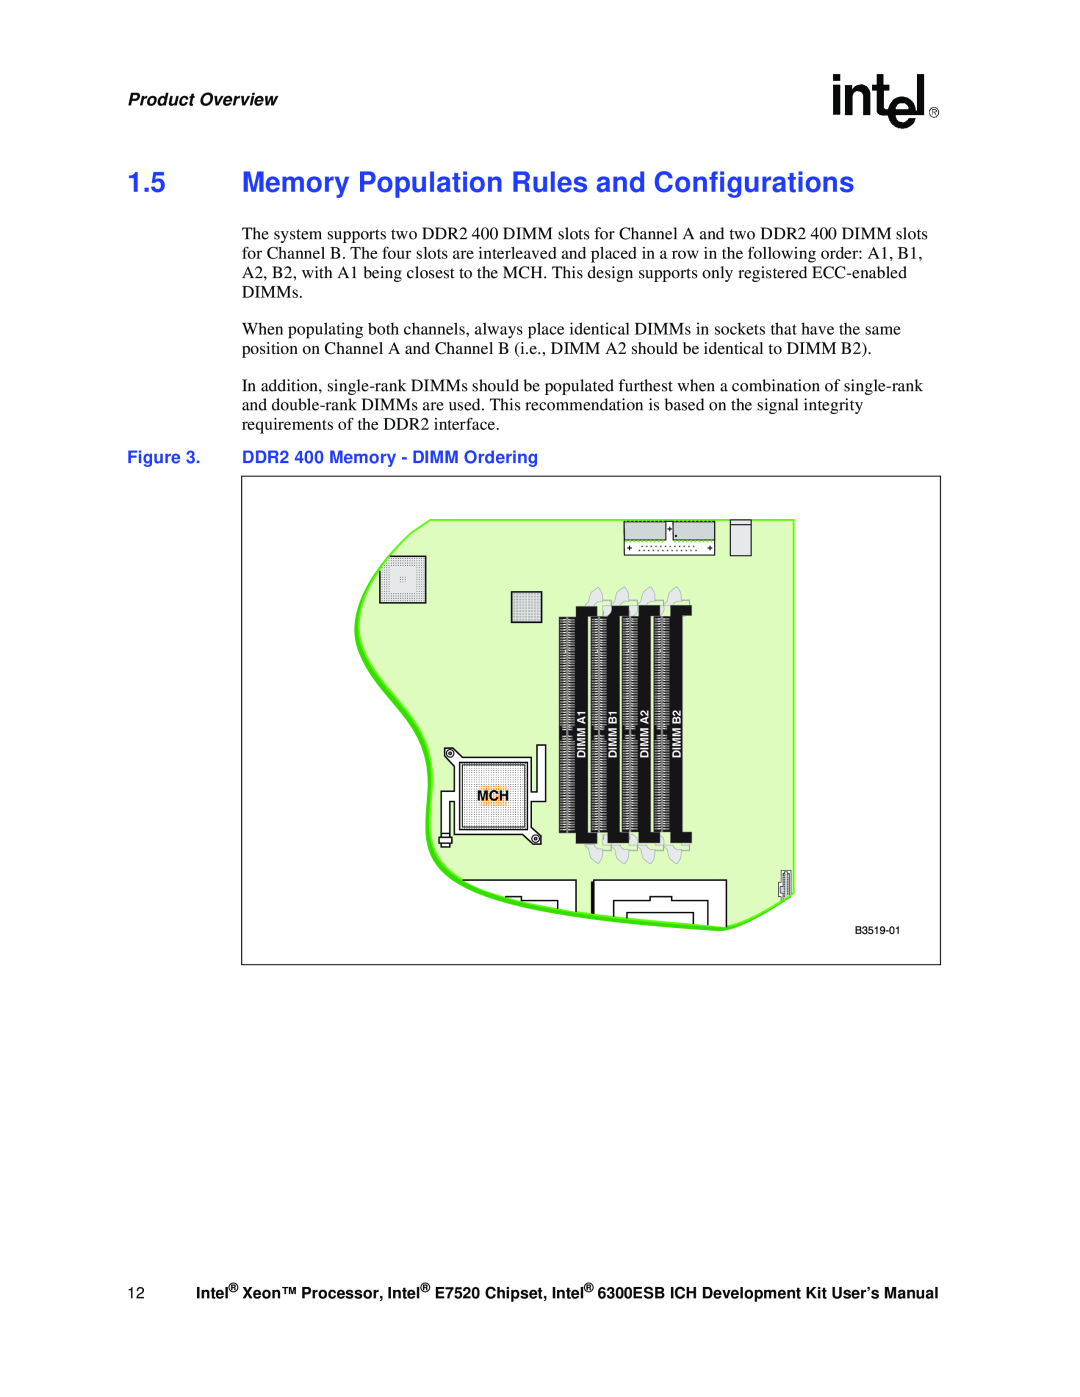 Intel Xeon, 6300ESB ICH Memory Population Rules and Configurations, DDR2 400 Memory - DIMM Ordering, Product Overview 